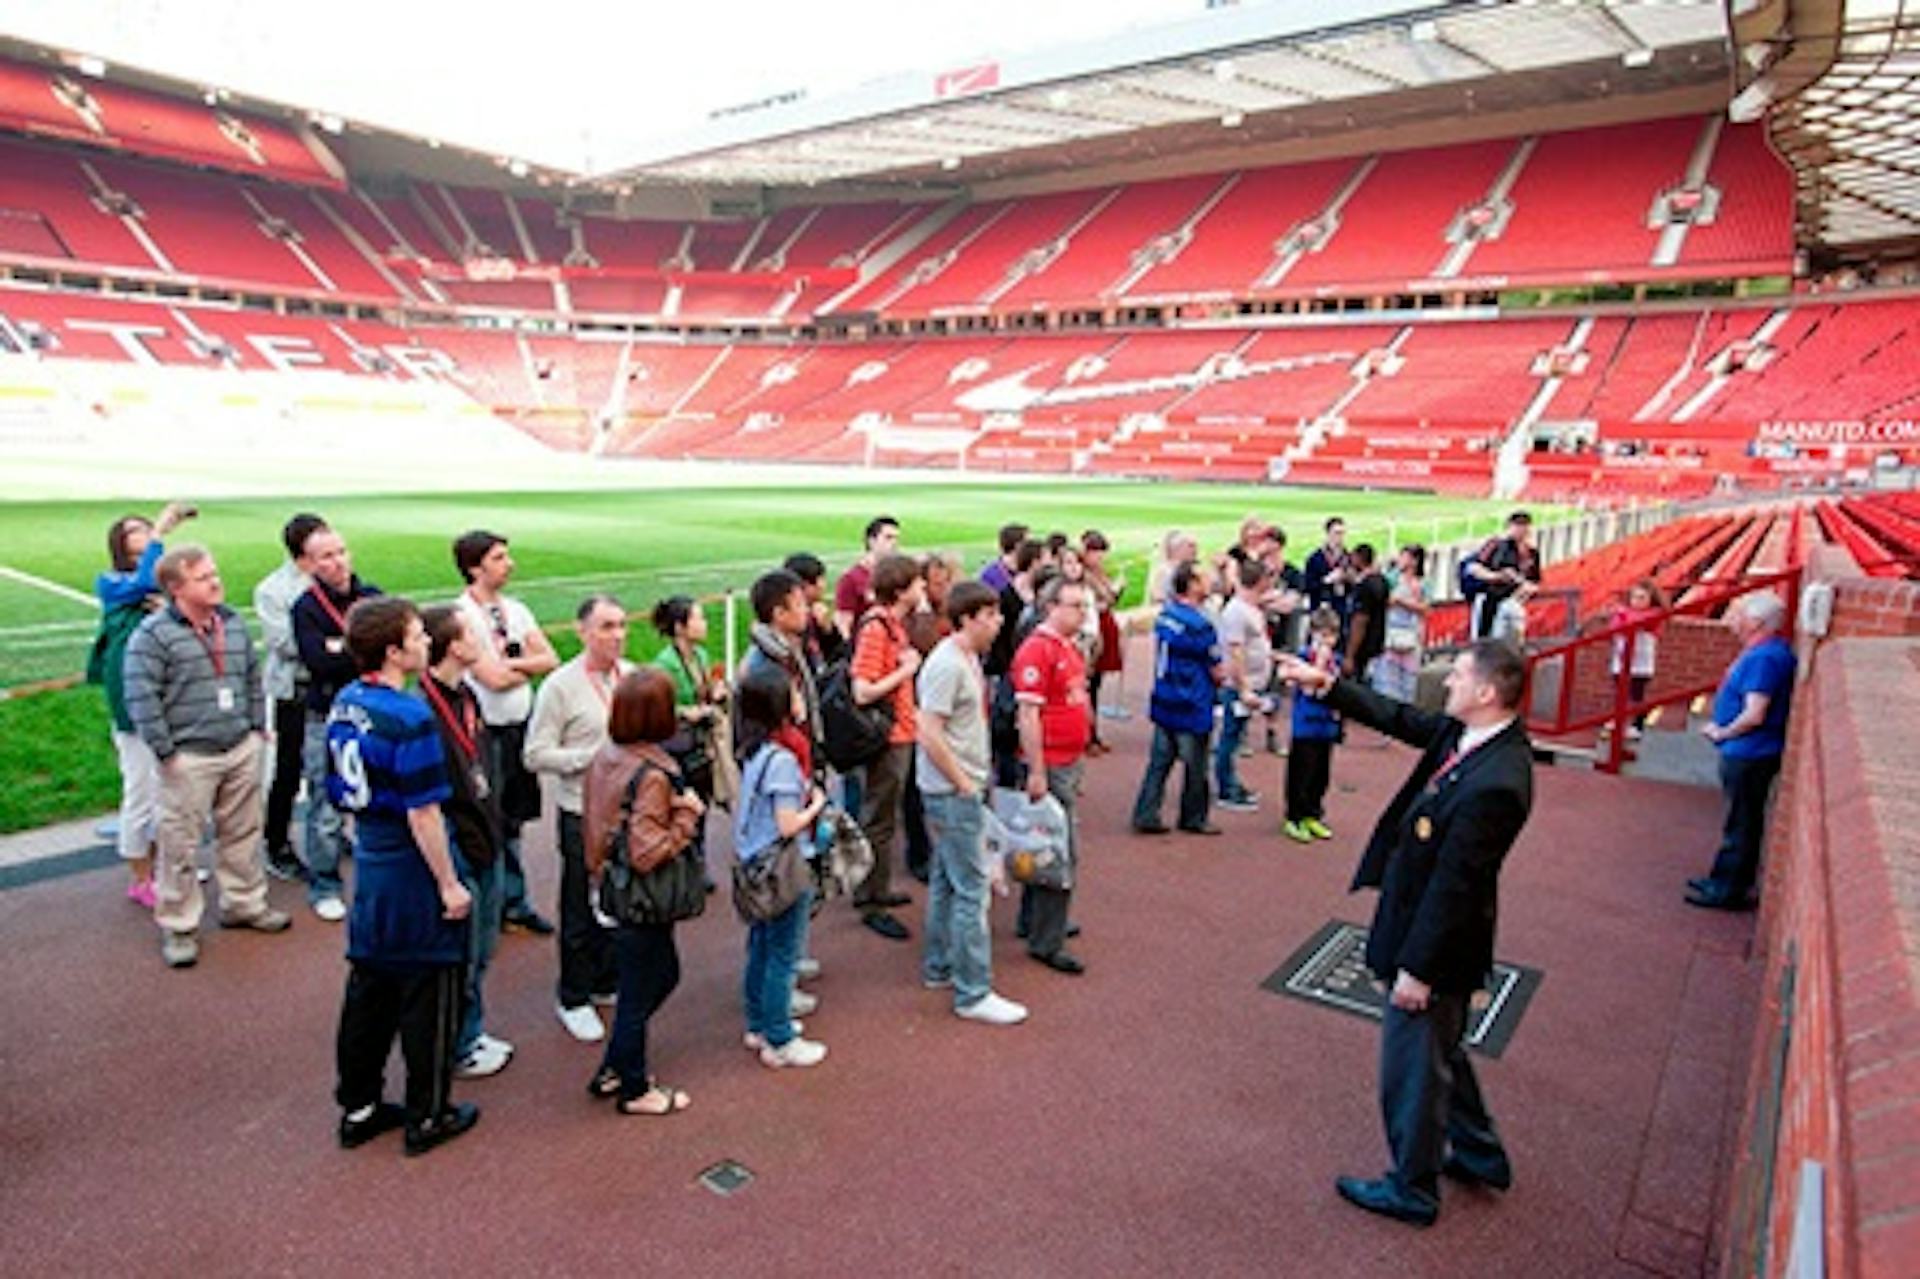 Manchester United Football Club Stadium Tour and Leisure Cruise for One Adult and One Child